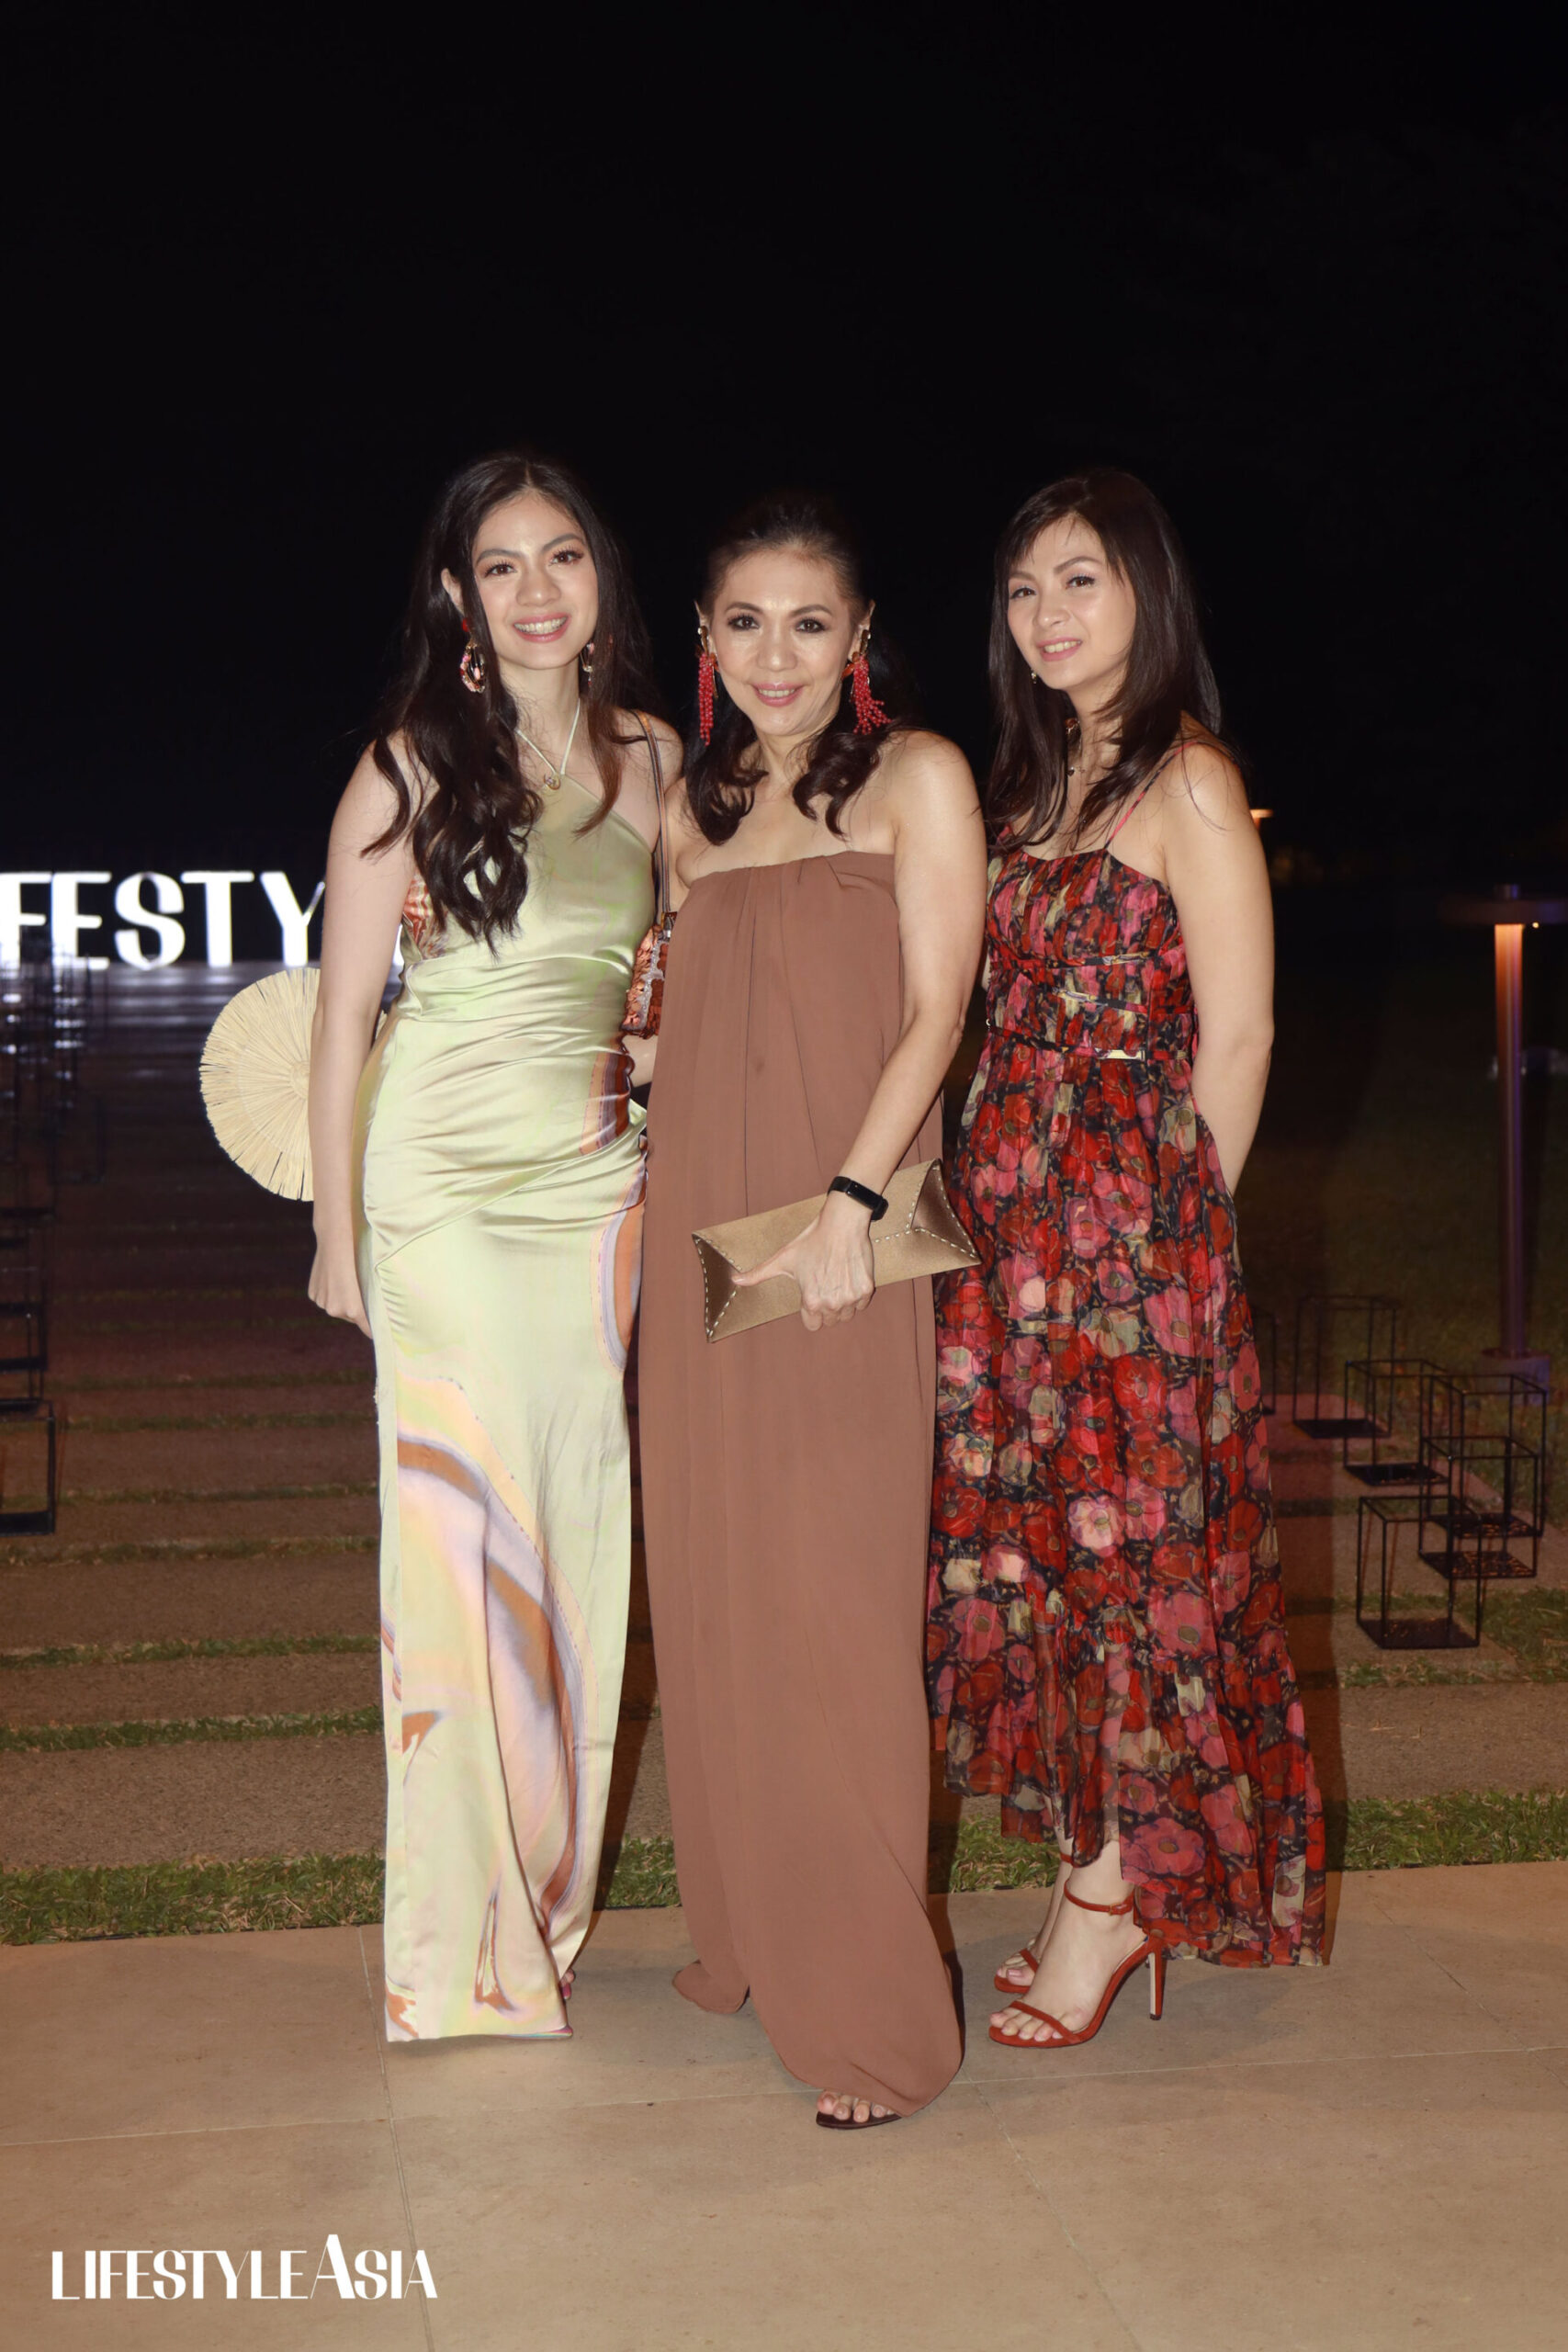 Mother and daughter bond with Kaye and her daughters Kerry and Kyle. LA Asks: What Did You Love Most About The 2023 Lifestyle Asia Gala?